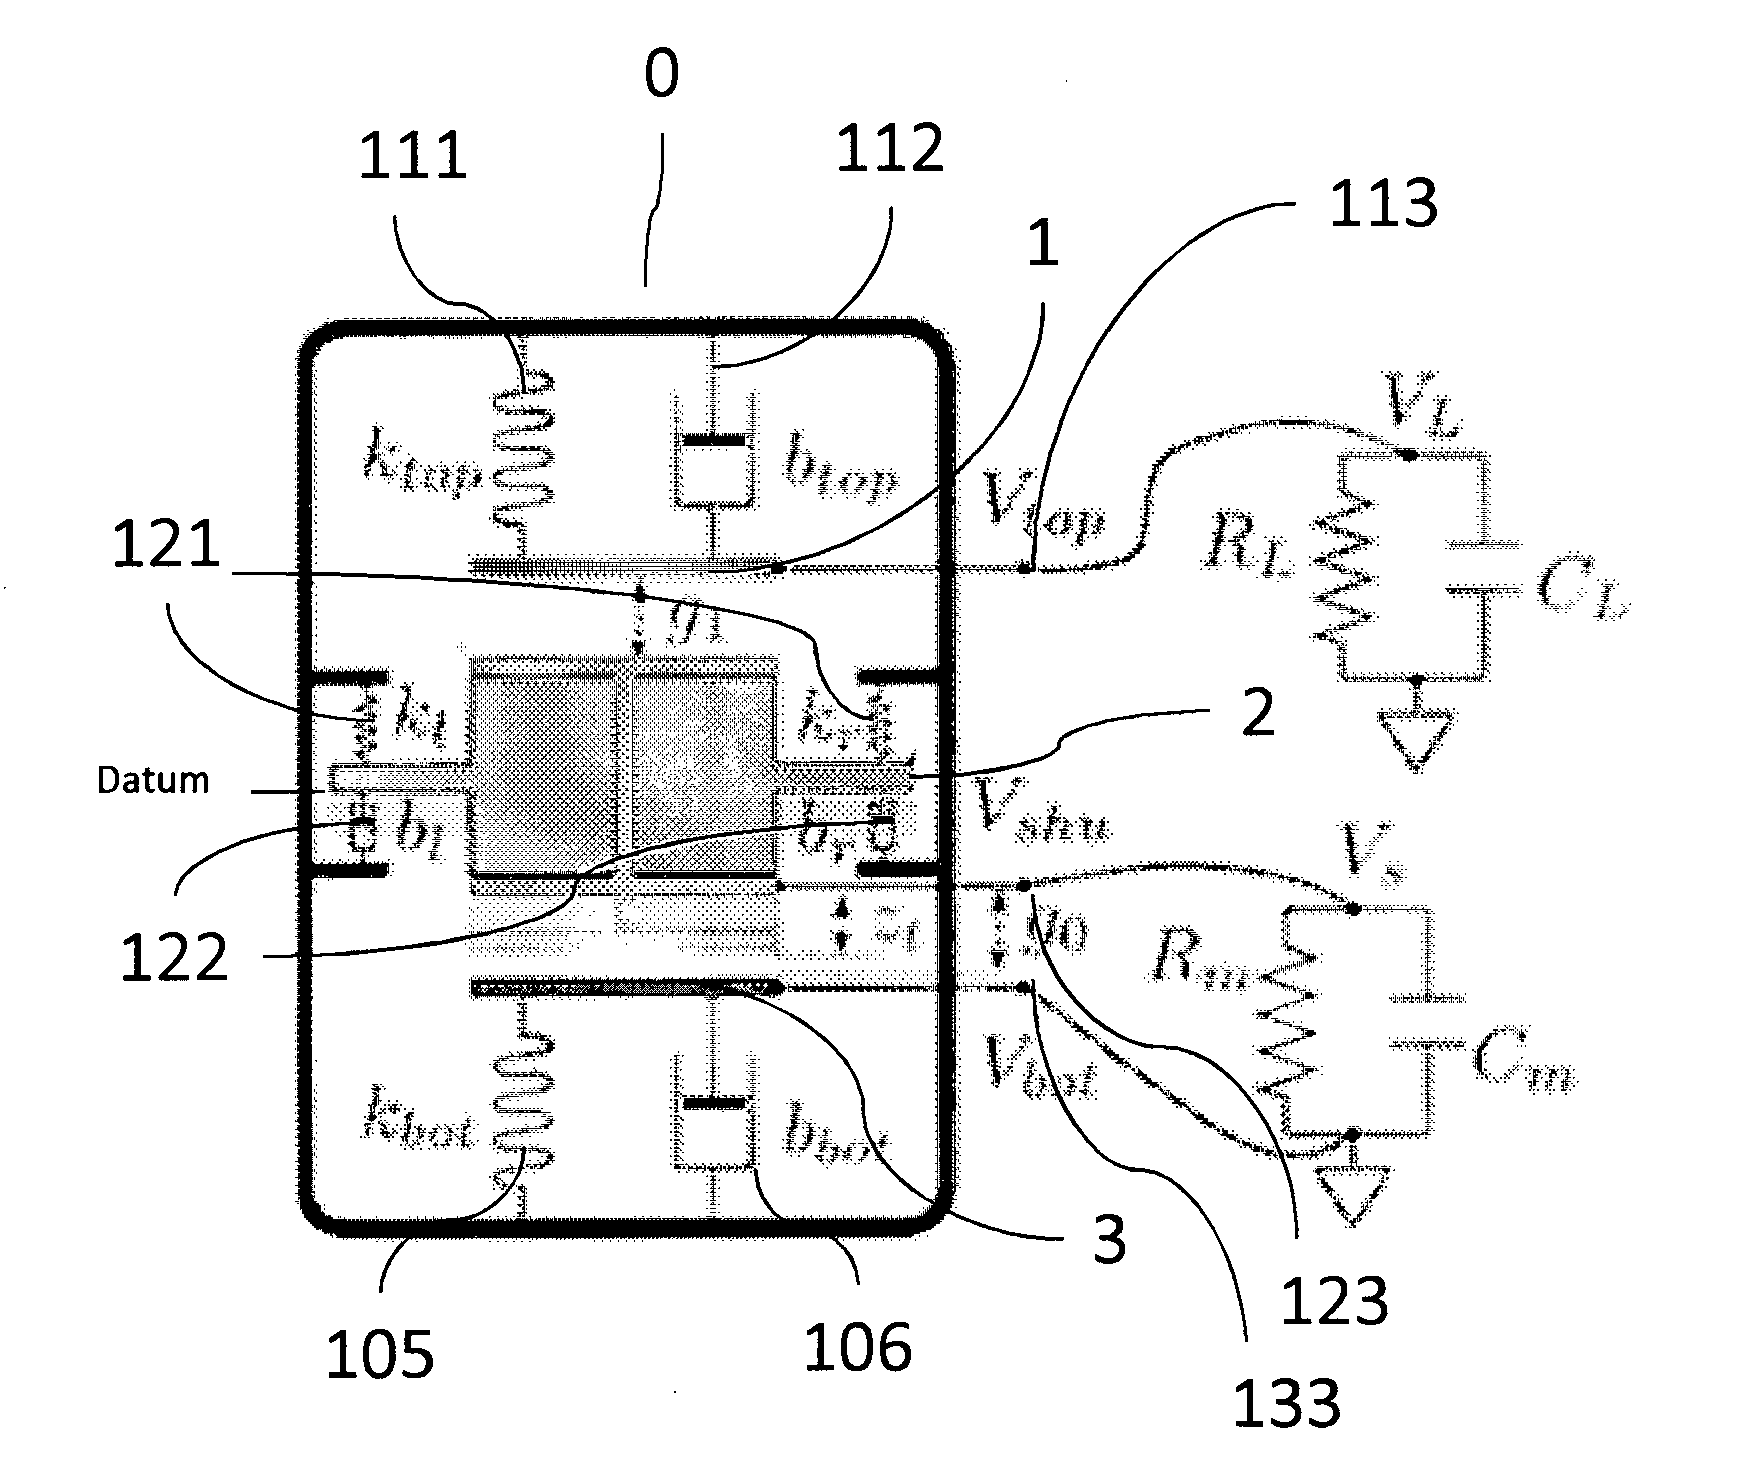 Method of energy harvesting using built-in potential difference of metal-to-metal junctions and device thereof